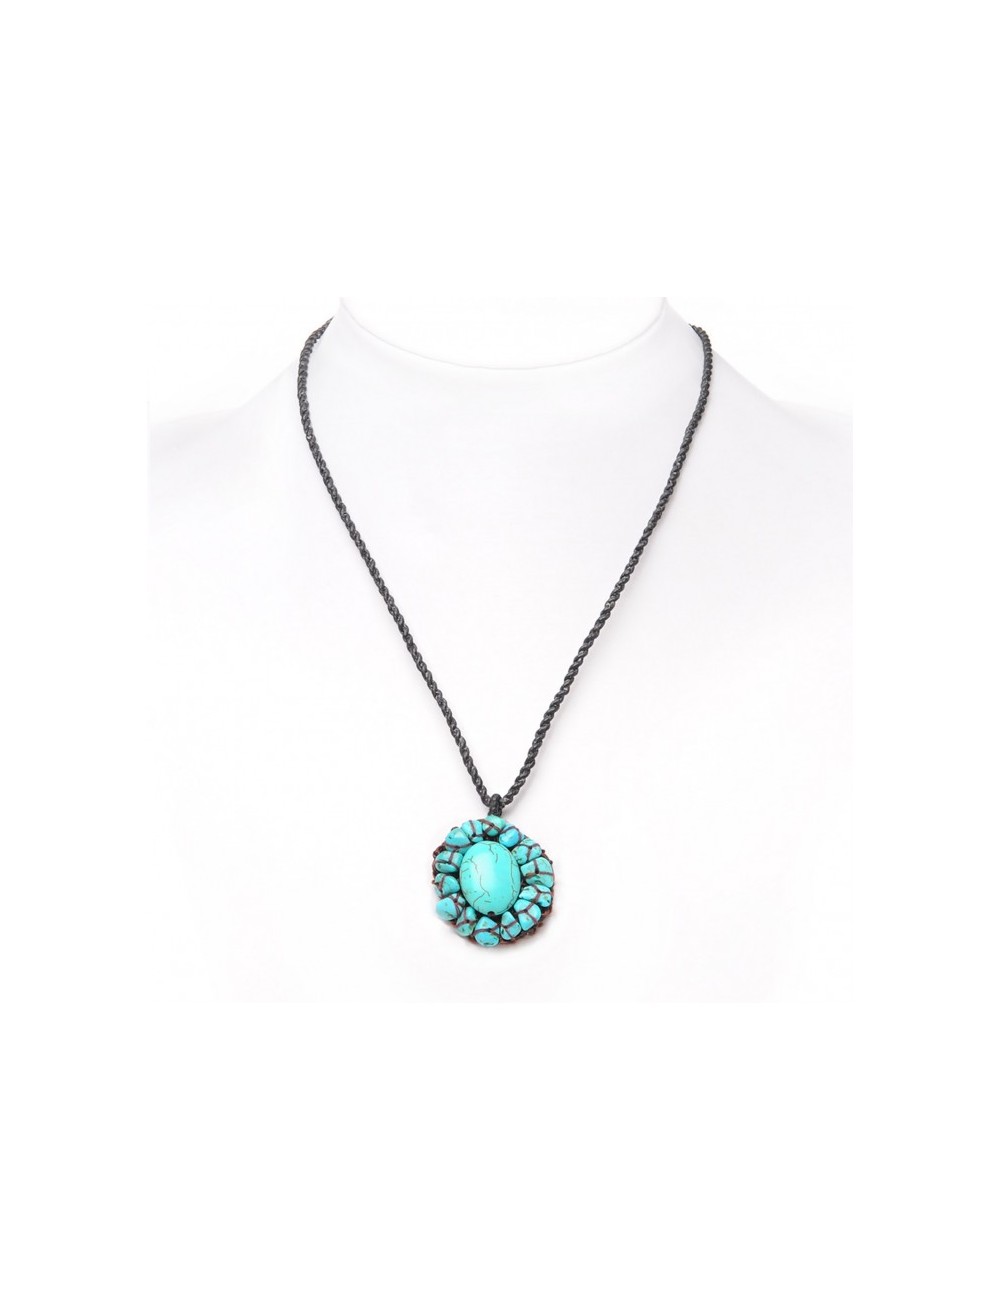 Necklace in macramé with turquoise medallion.